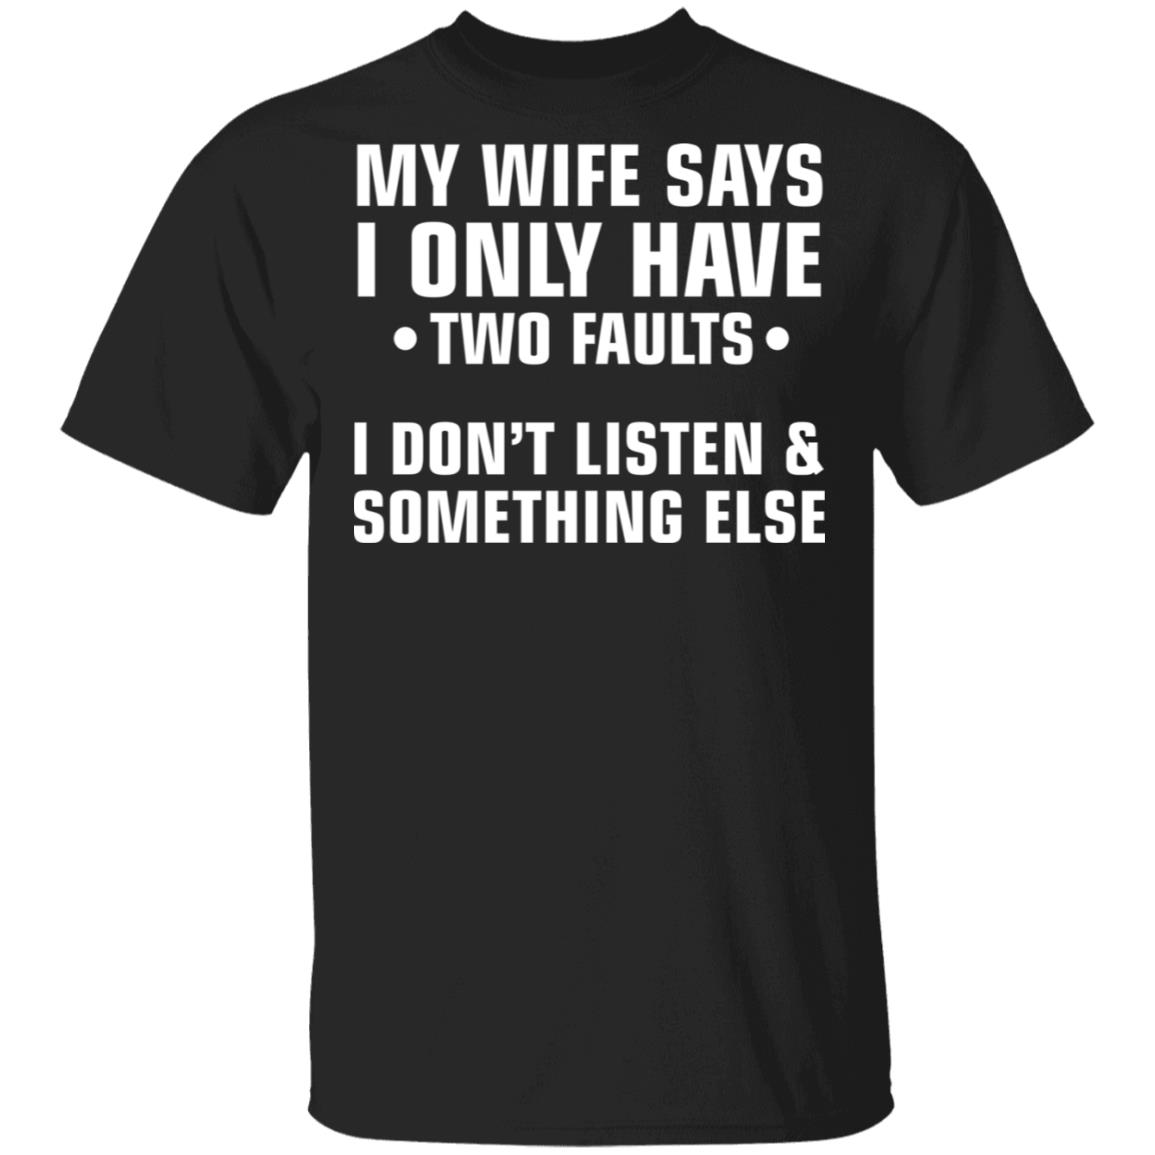 My wife says i only have two faults i don't listen and something else shirt